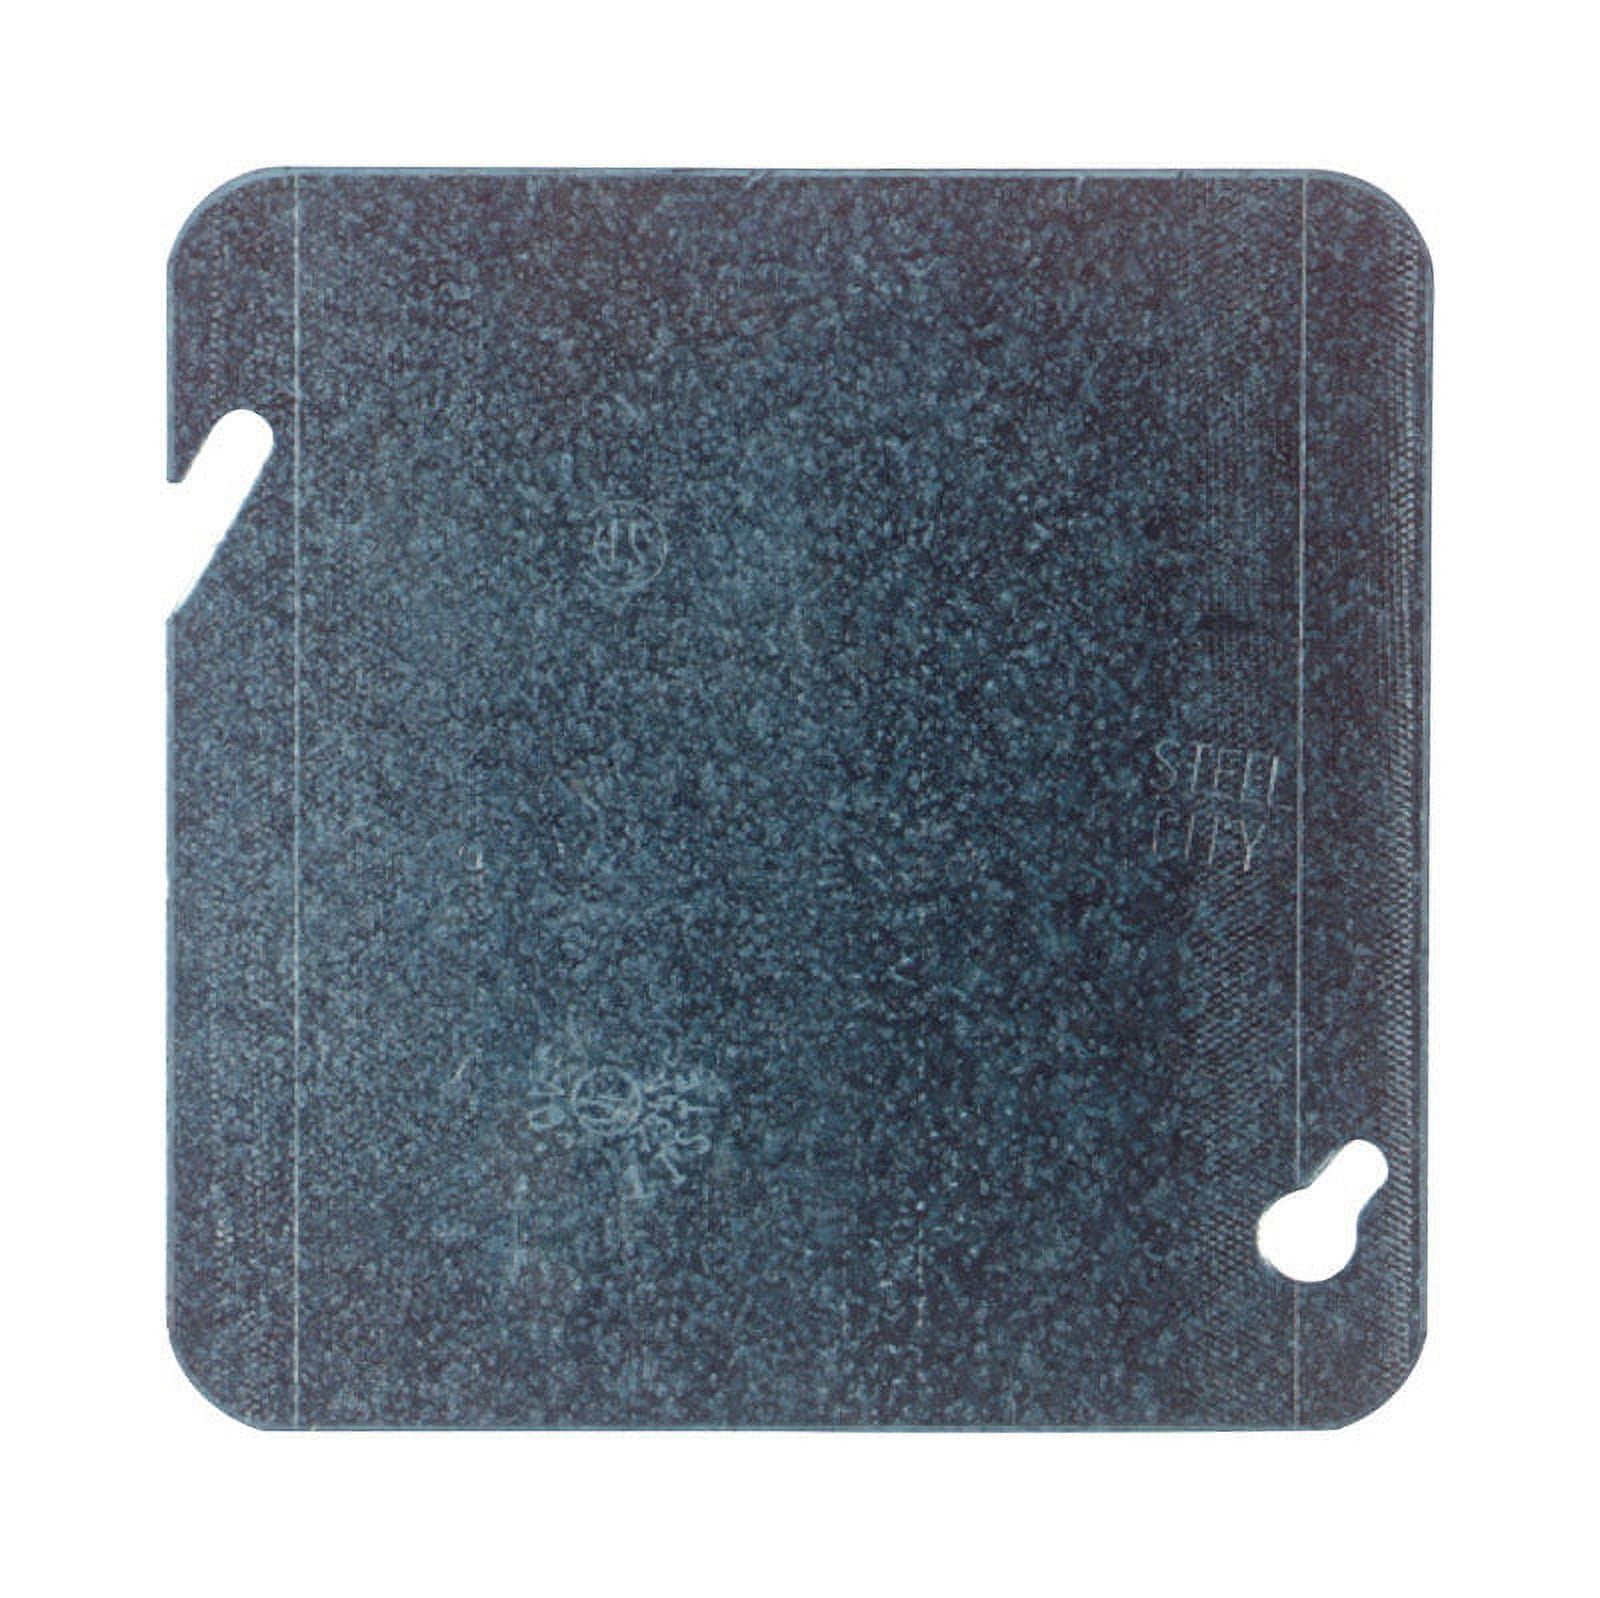 Picture of Thomas & Betts 72 C 1 4.19 in. Pre-Galvanized Steel Flat & Blank Square Box Cover